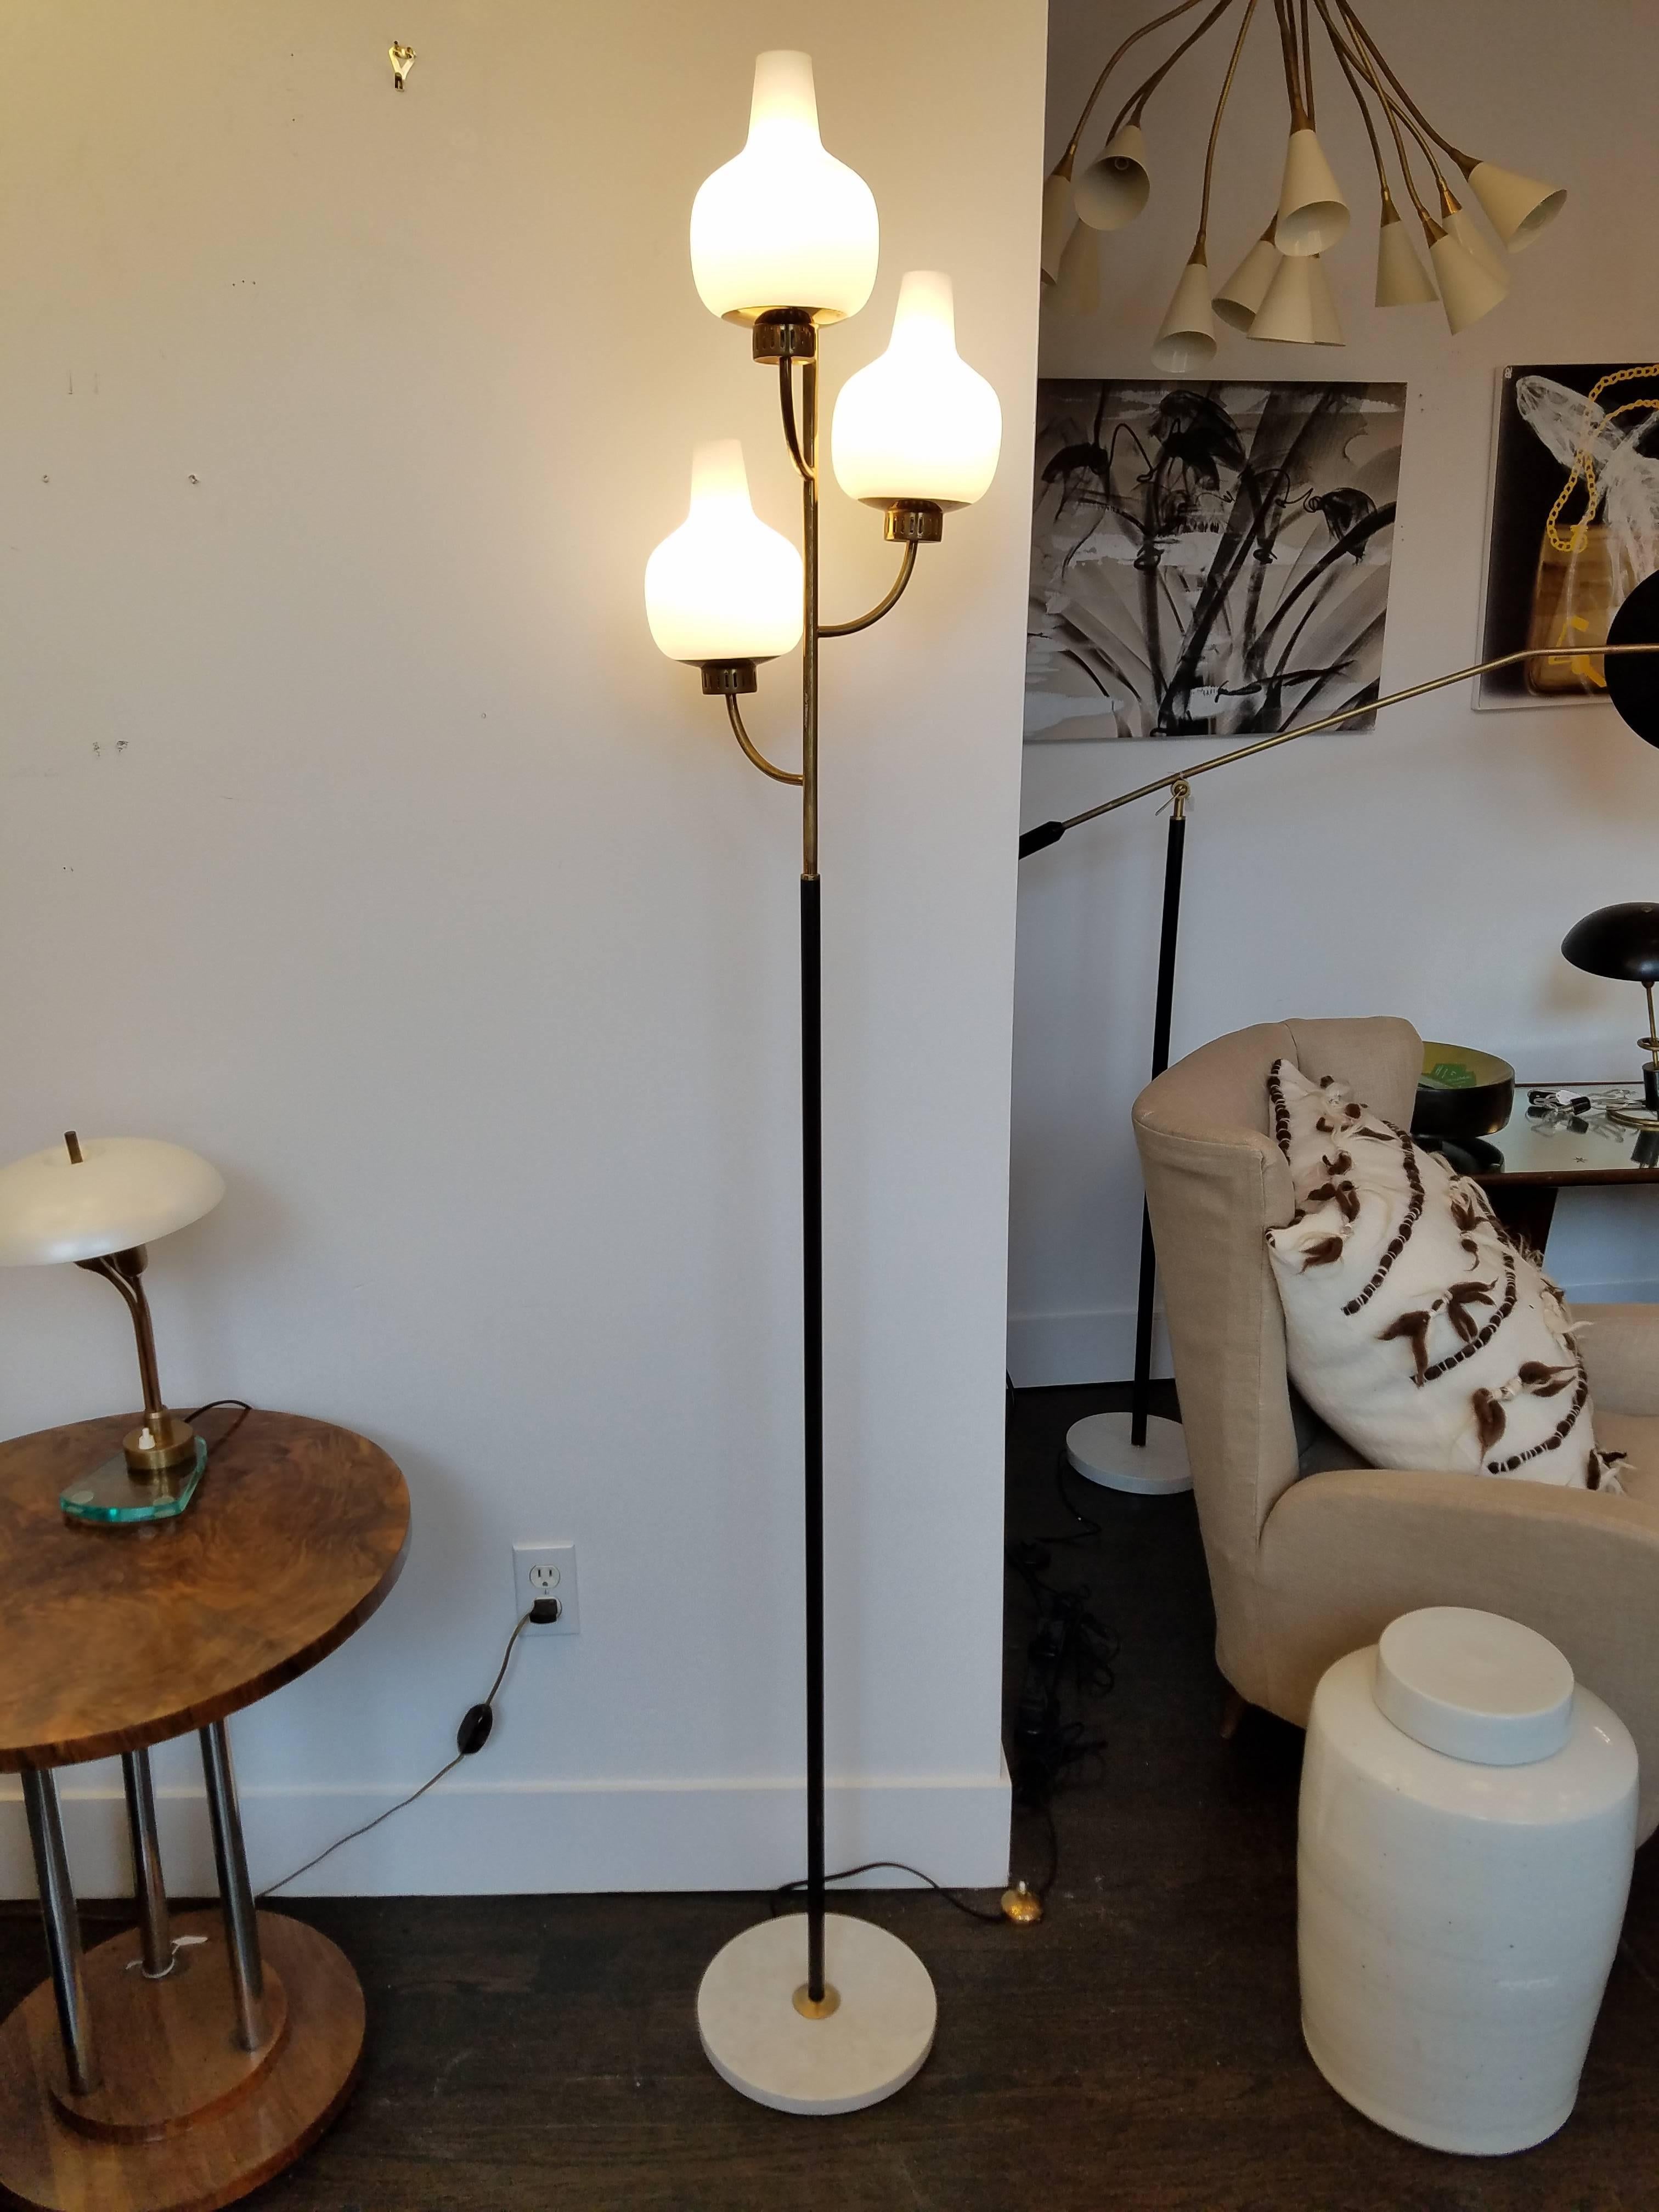 Vintage 1950s Italian floor lamp by Stilnovo, featuring three brass arch branches holding individual frosted white globes. Brass pole has black enamel lower part and is supported on a marble base. Made in Italy.